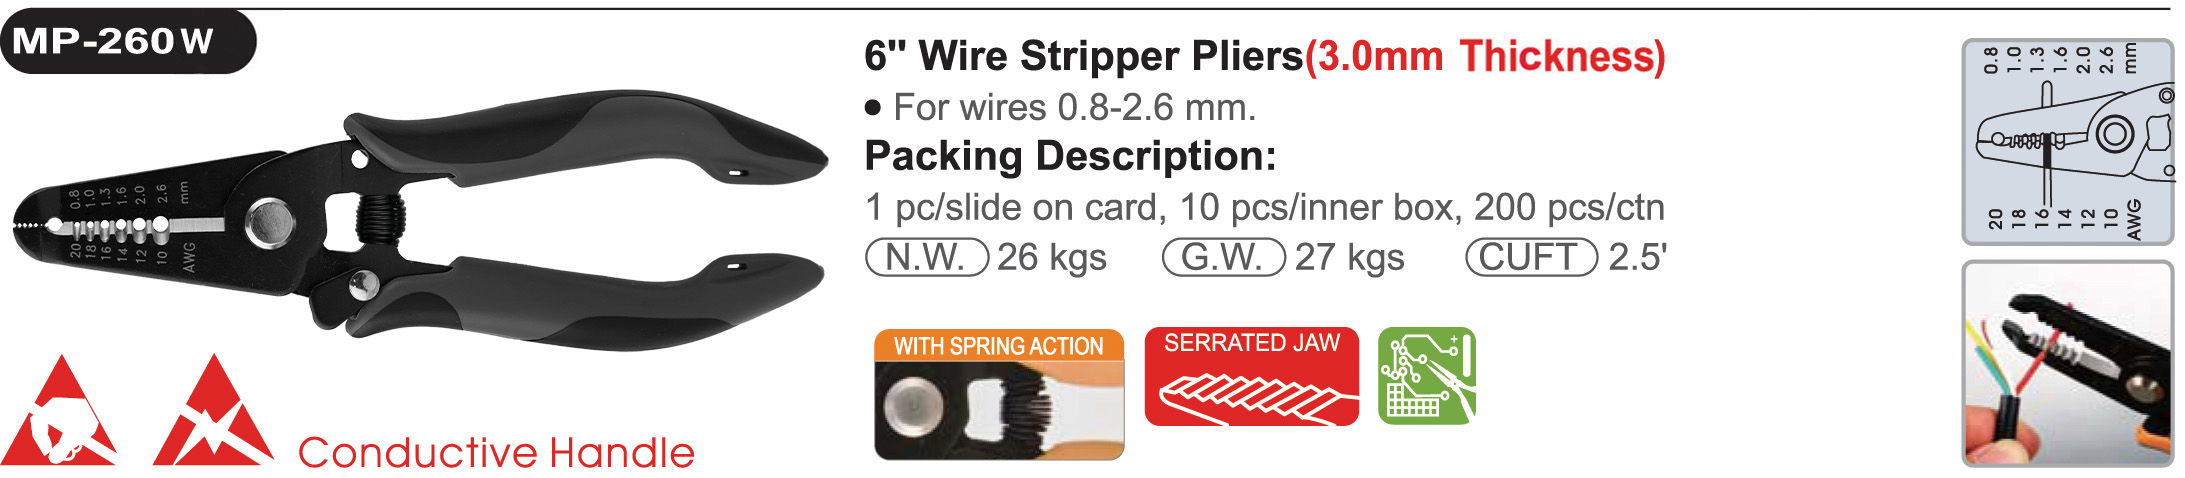 proimages/product/pliers/wire_strippers/ELECTRONICS_WIRE_STRIPPER_ESD/MP-260W/MP-260W_2023.jpg